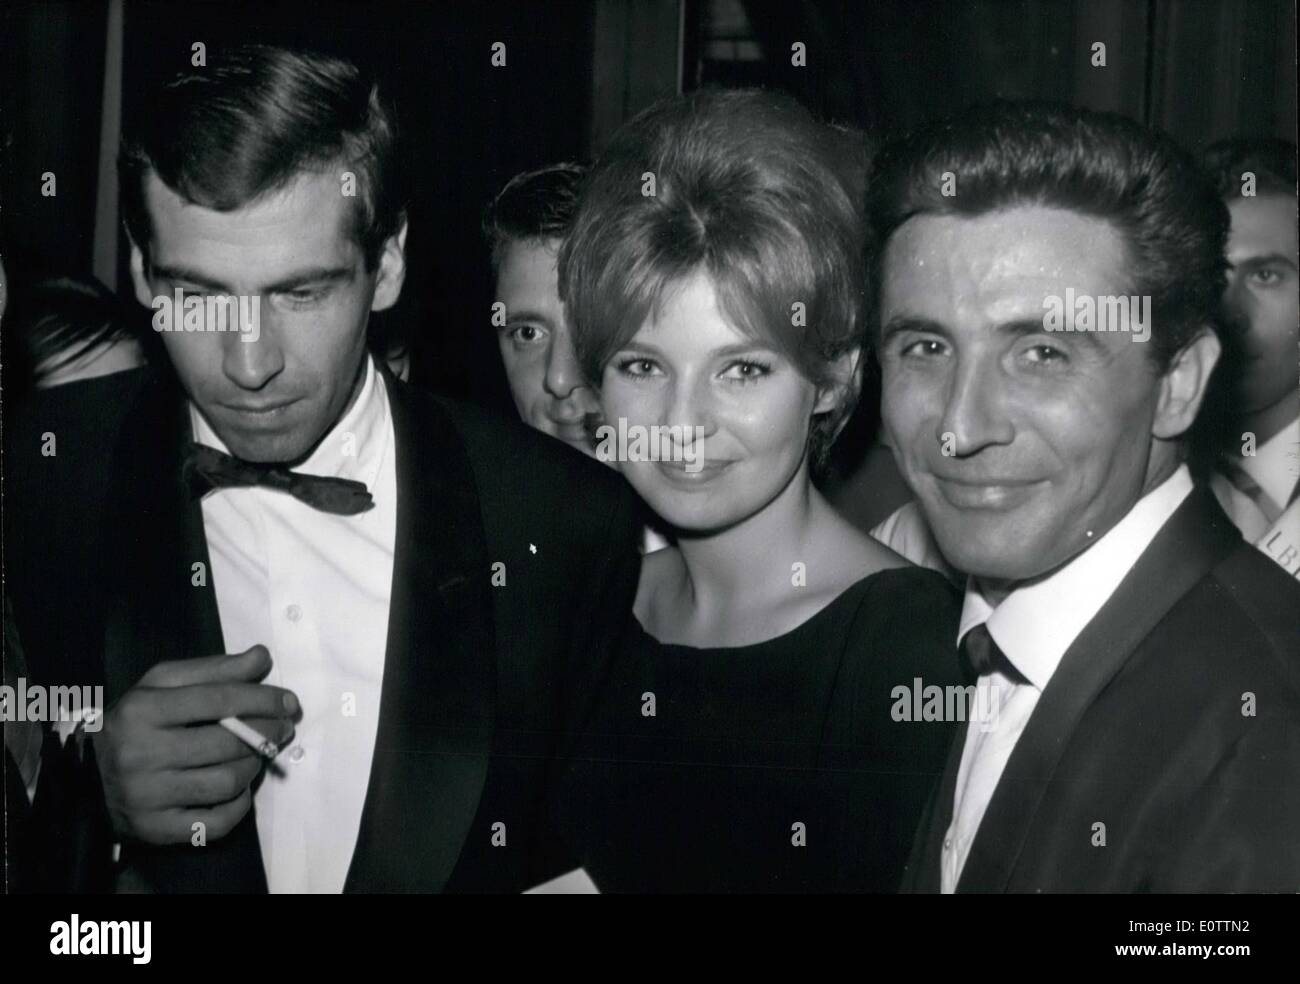 Sep. 09, 1960 - Gilbert Becaud Makes Come Back After Two Years Absence: After a two -year absence the stage, Gilbert Becaud the Stock Photo